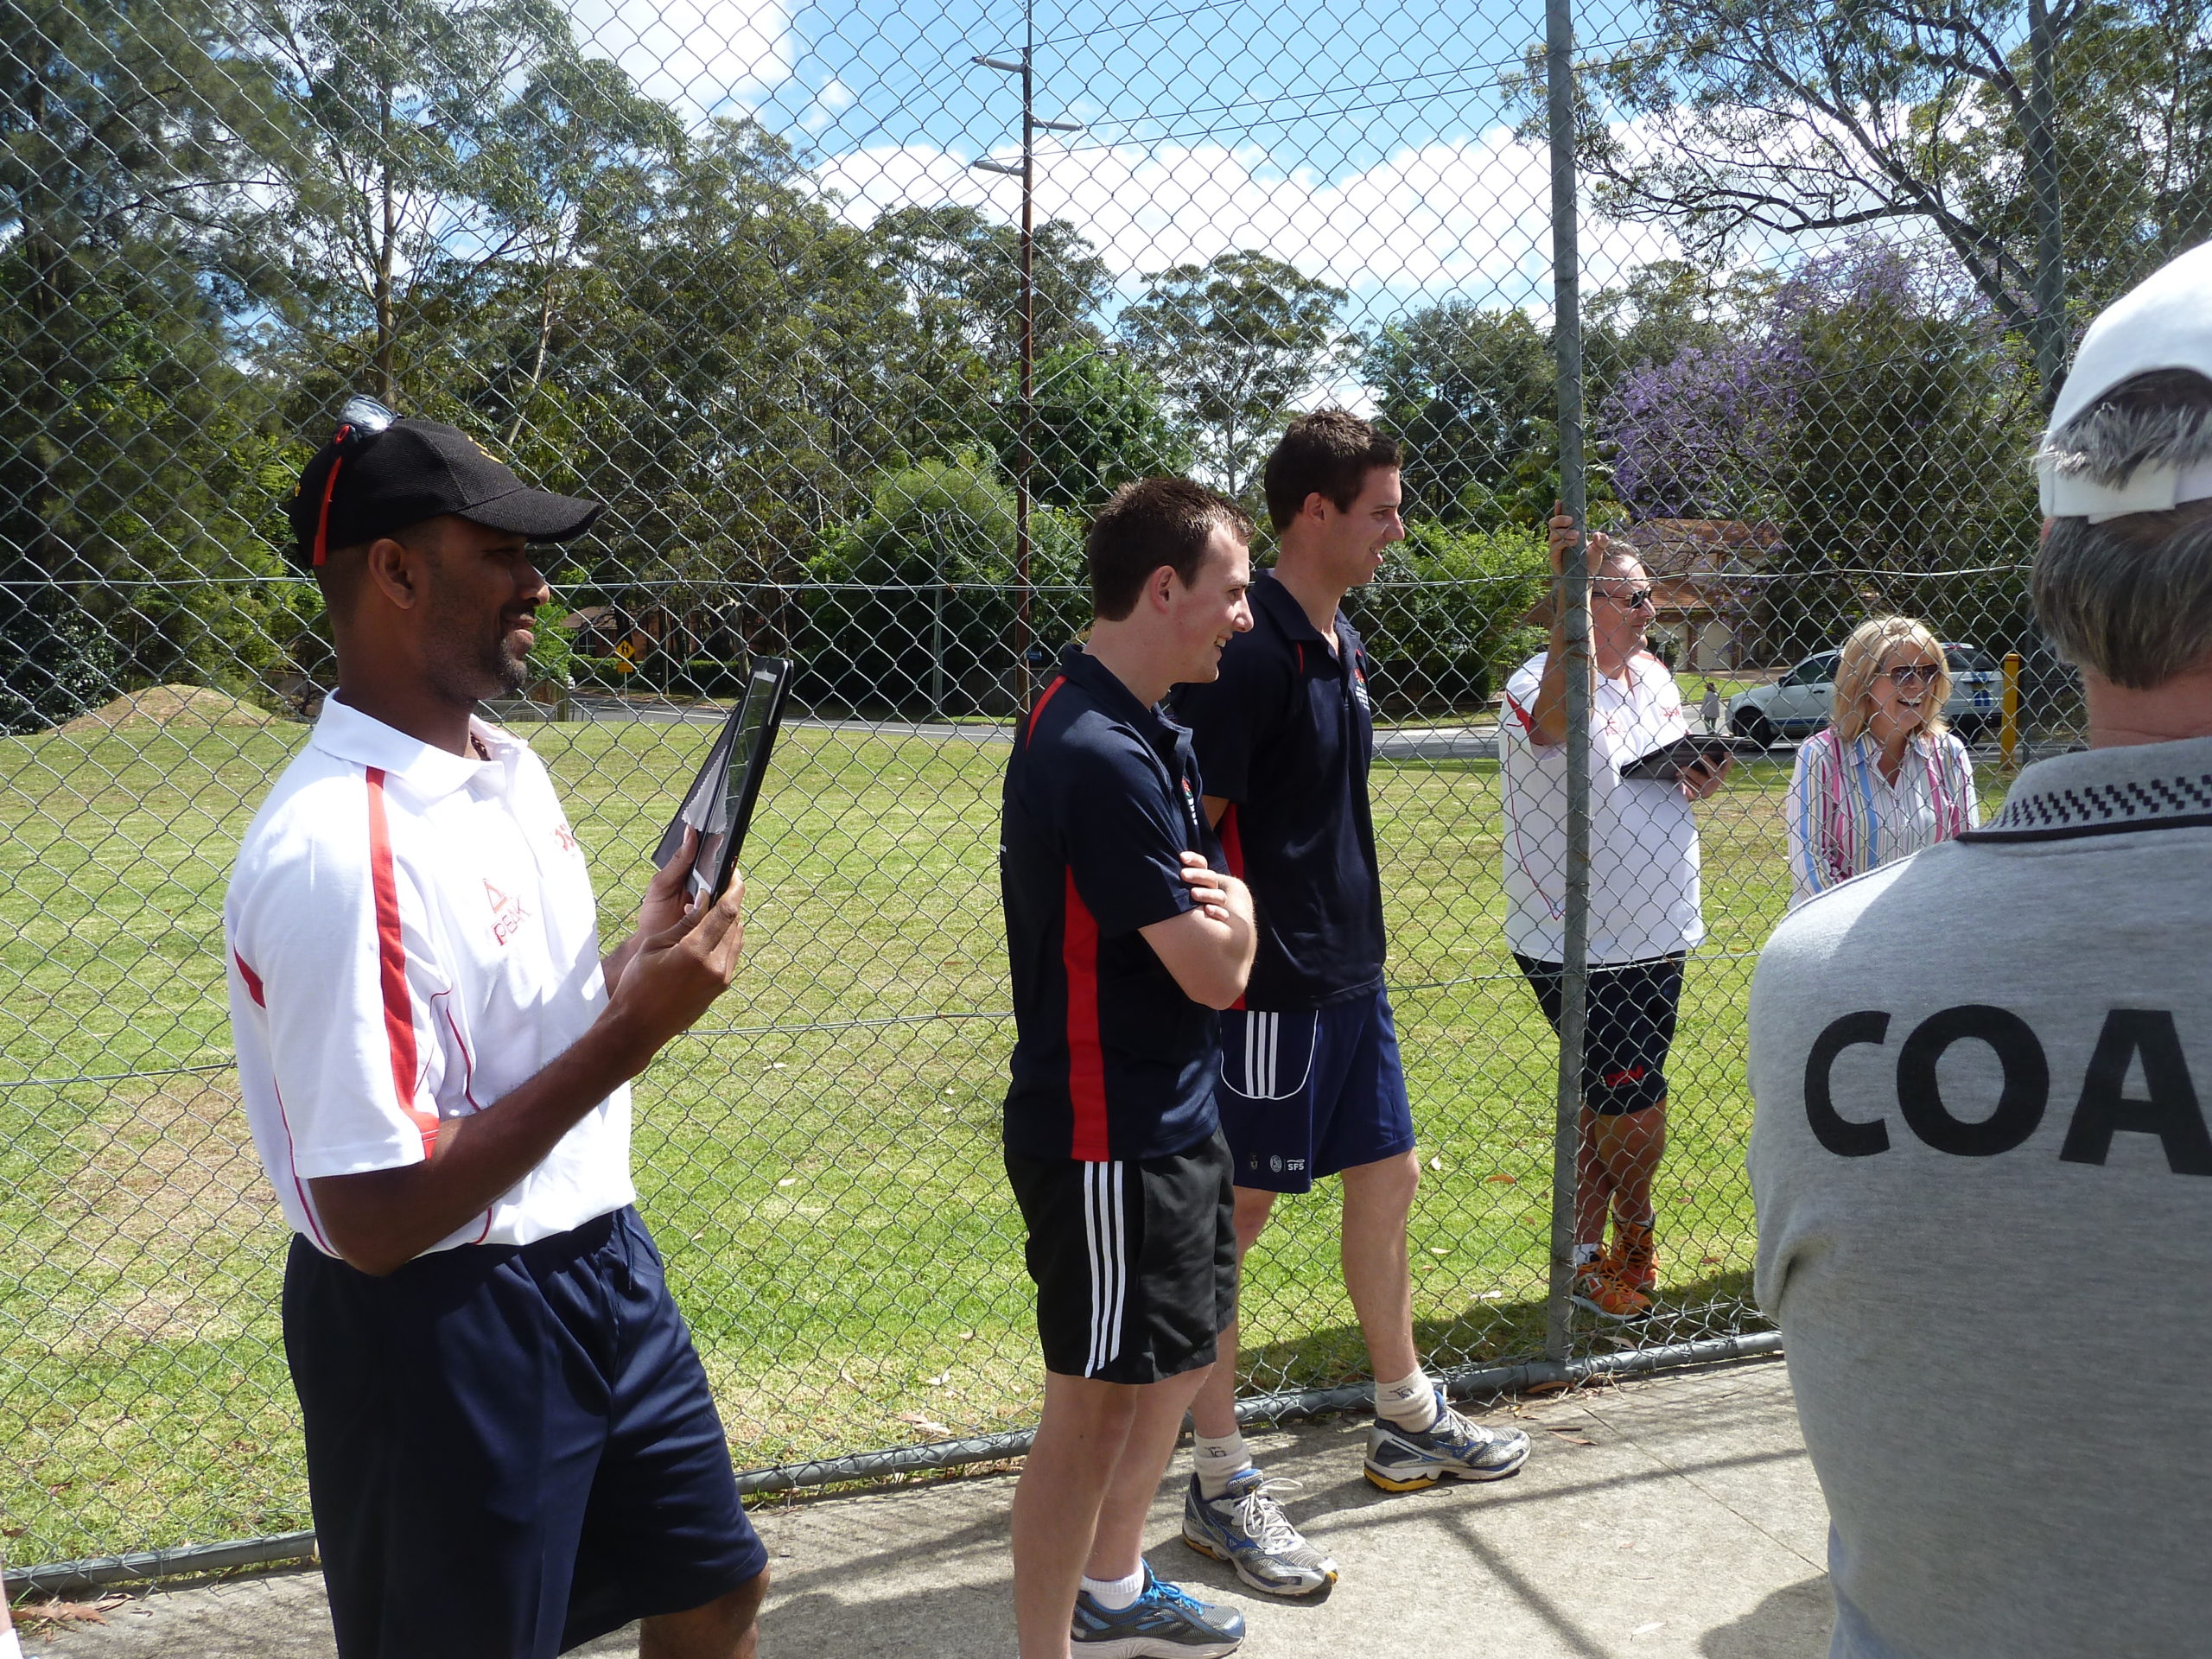 Corey Collymore (West Indies fast bowler) at the Craig McDermott Coaching Clinic with Matt Jobson and Scott Henderson - Sports Club Sunday 11 November 2012.